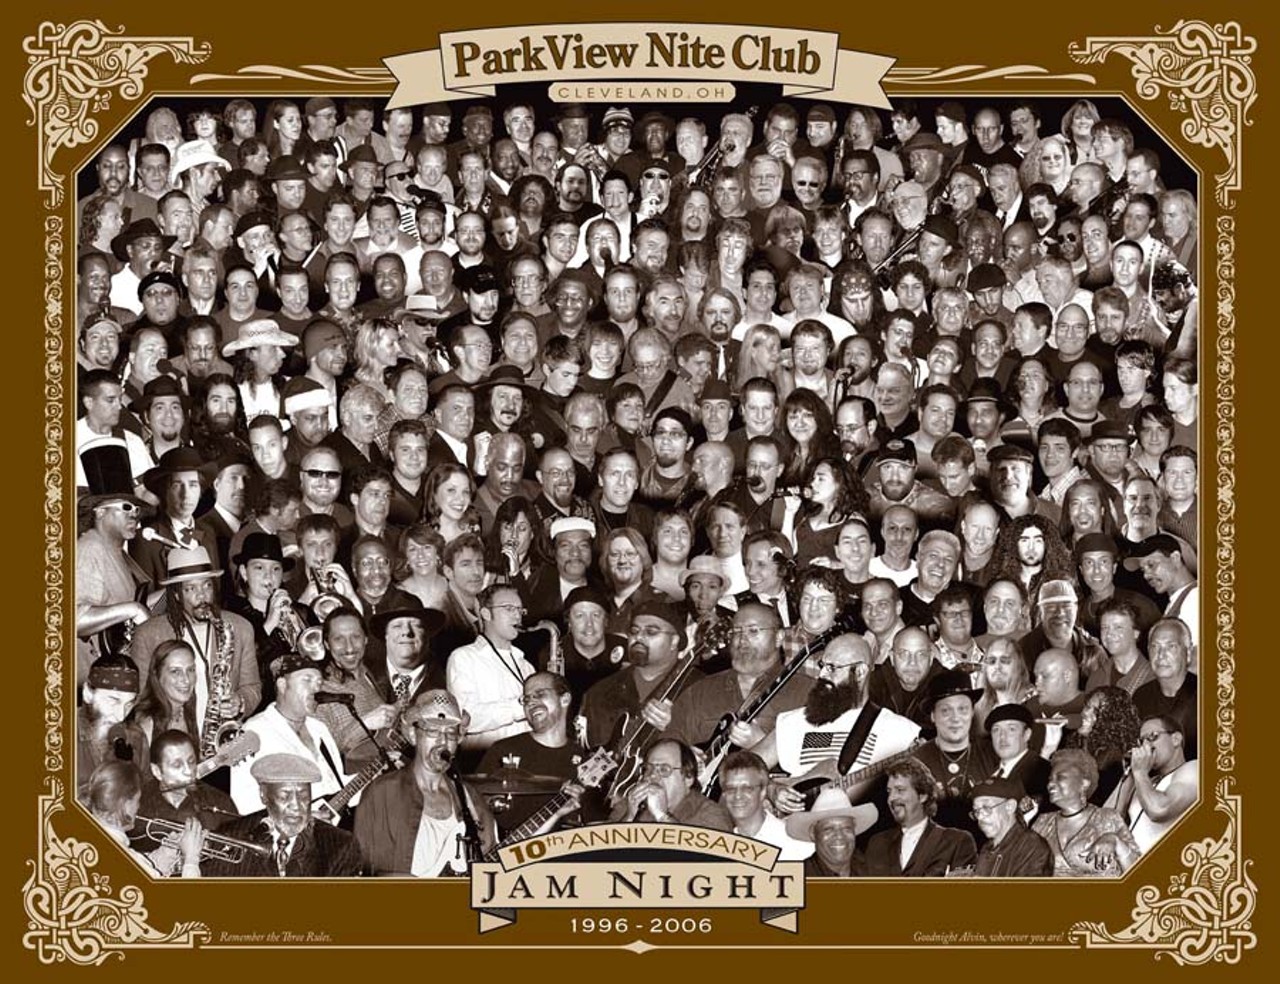 The collage that hangs in Parkview, showcasing all the musicians who played during the first 10 years